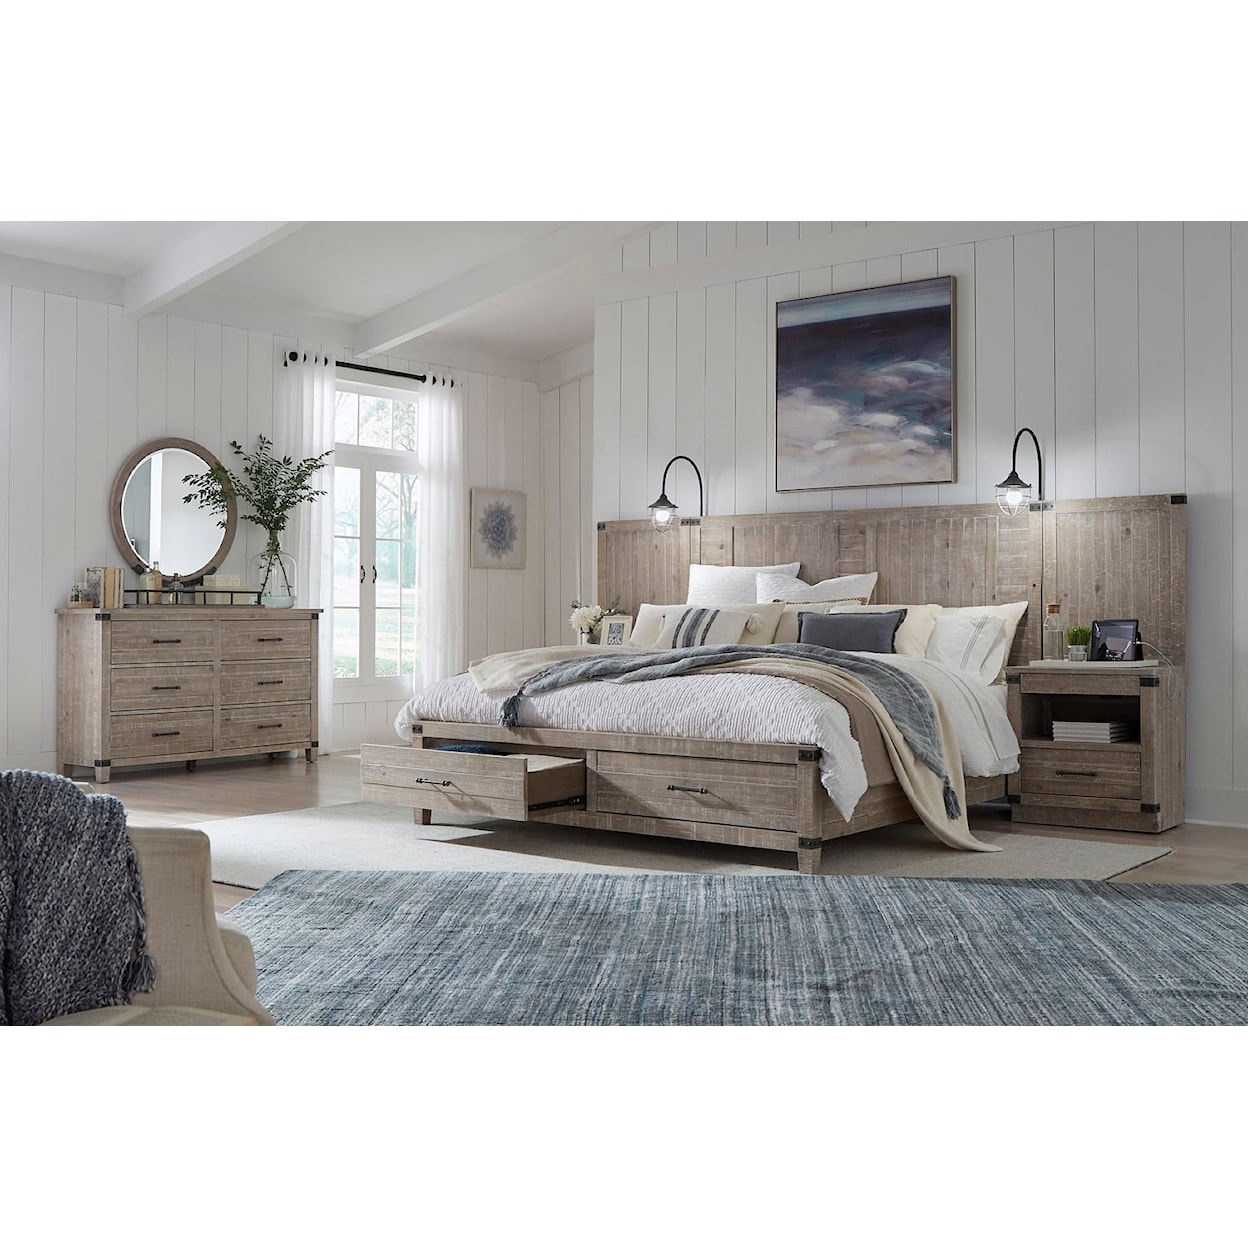 Aspenhome Foundry California King Storage Panel Bed